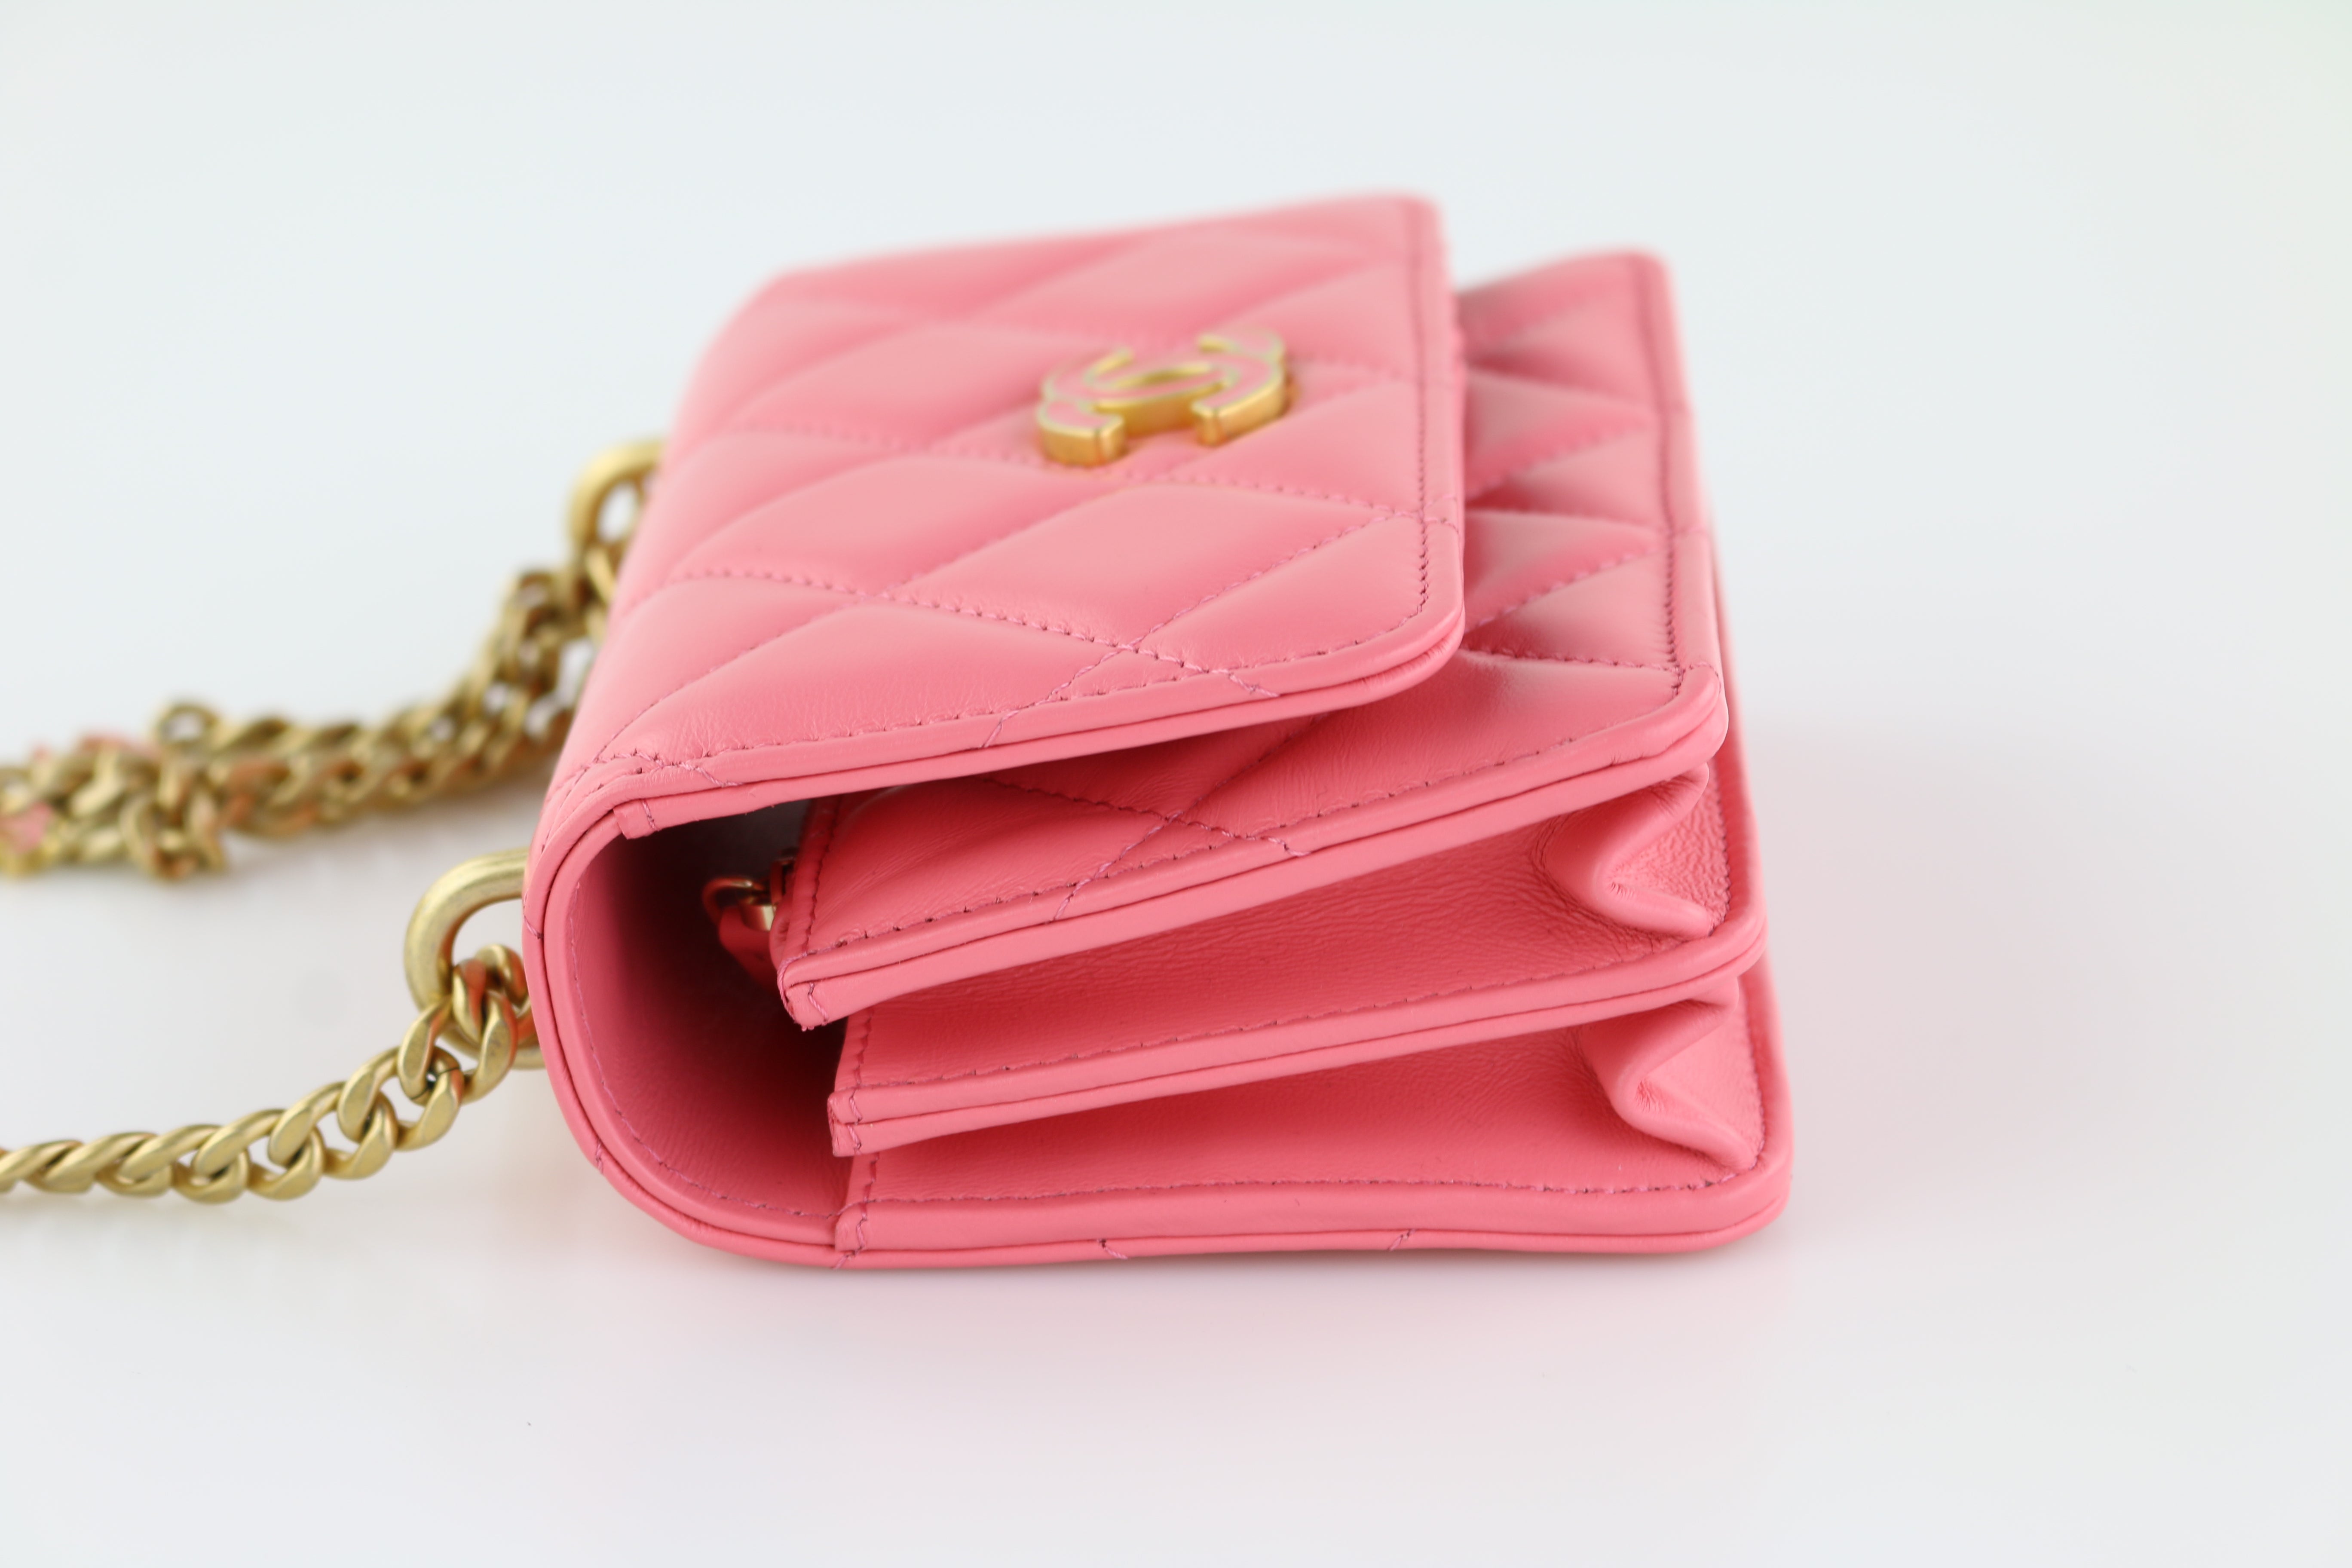 Want It Wednesday: Chanel Flap Bag in Pink Cloudy Pearly Goatskin